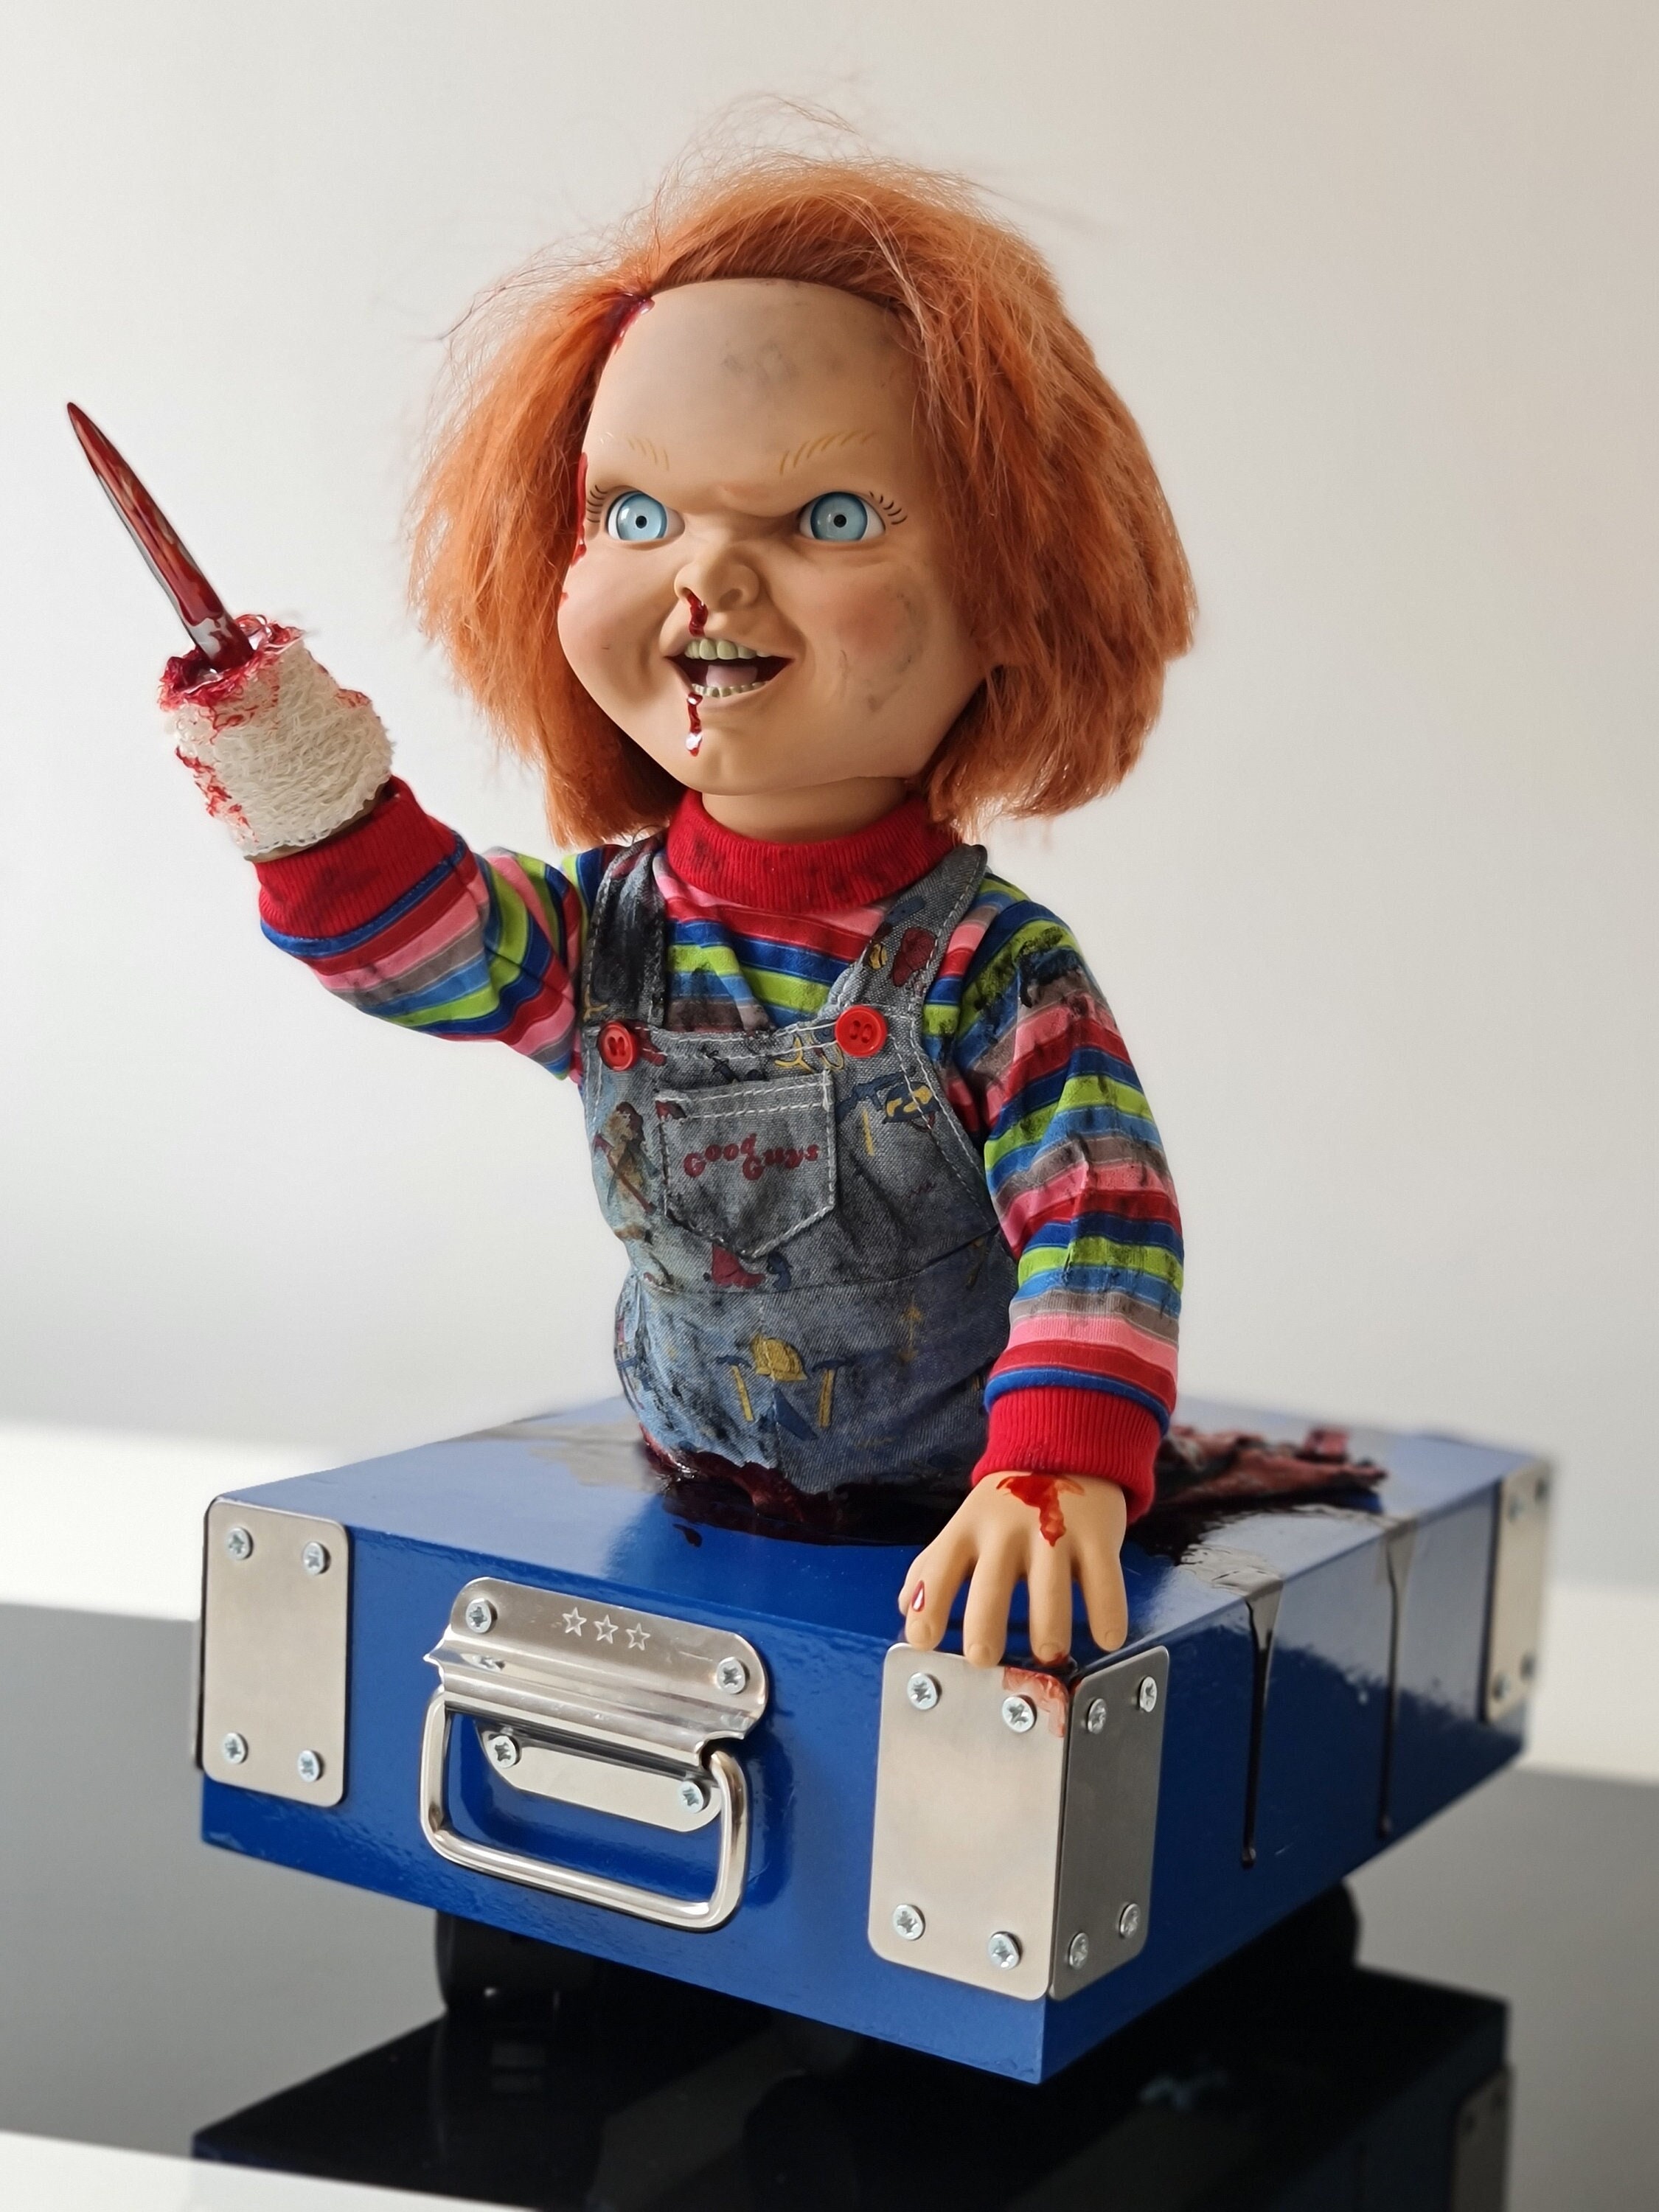 Custom Chucky Doll From Childs Play 2 End Scene on Blue Cart image